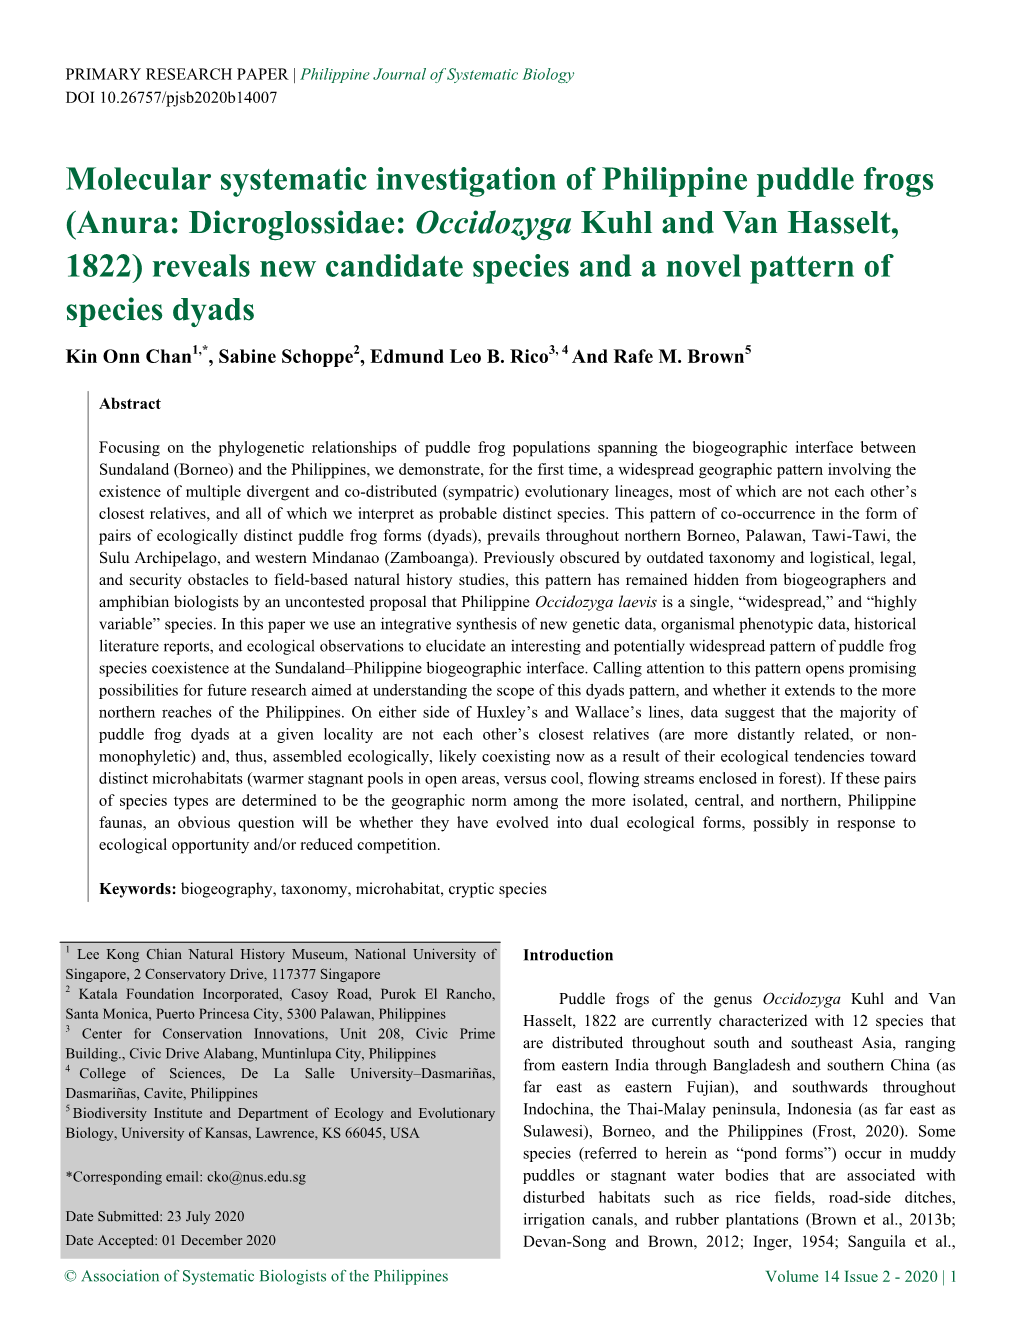 Molecular Systematic Investigation of Philippine Puddle Frogs